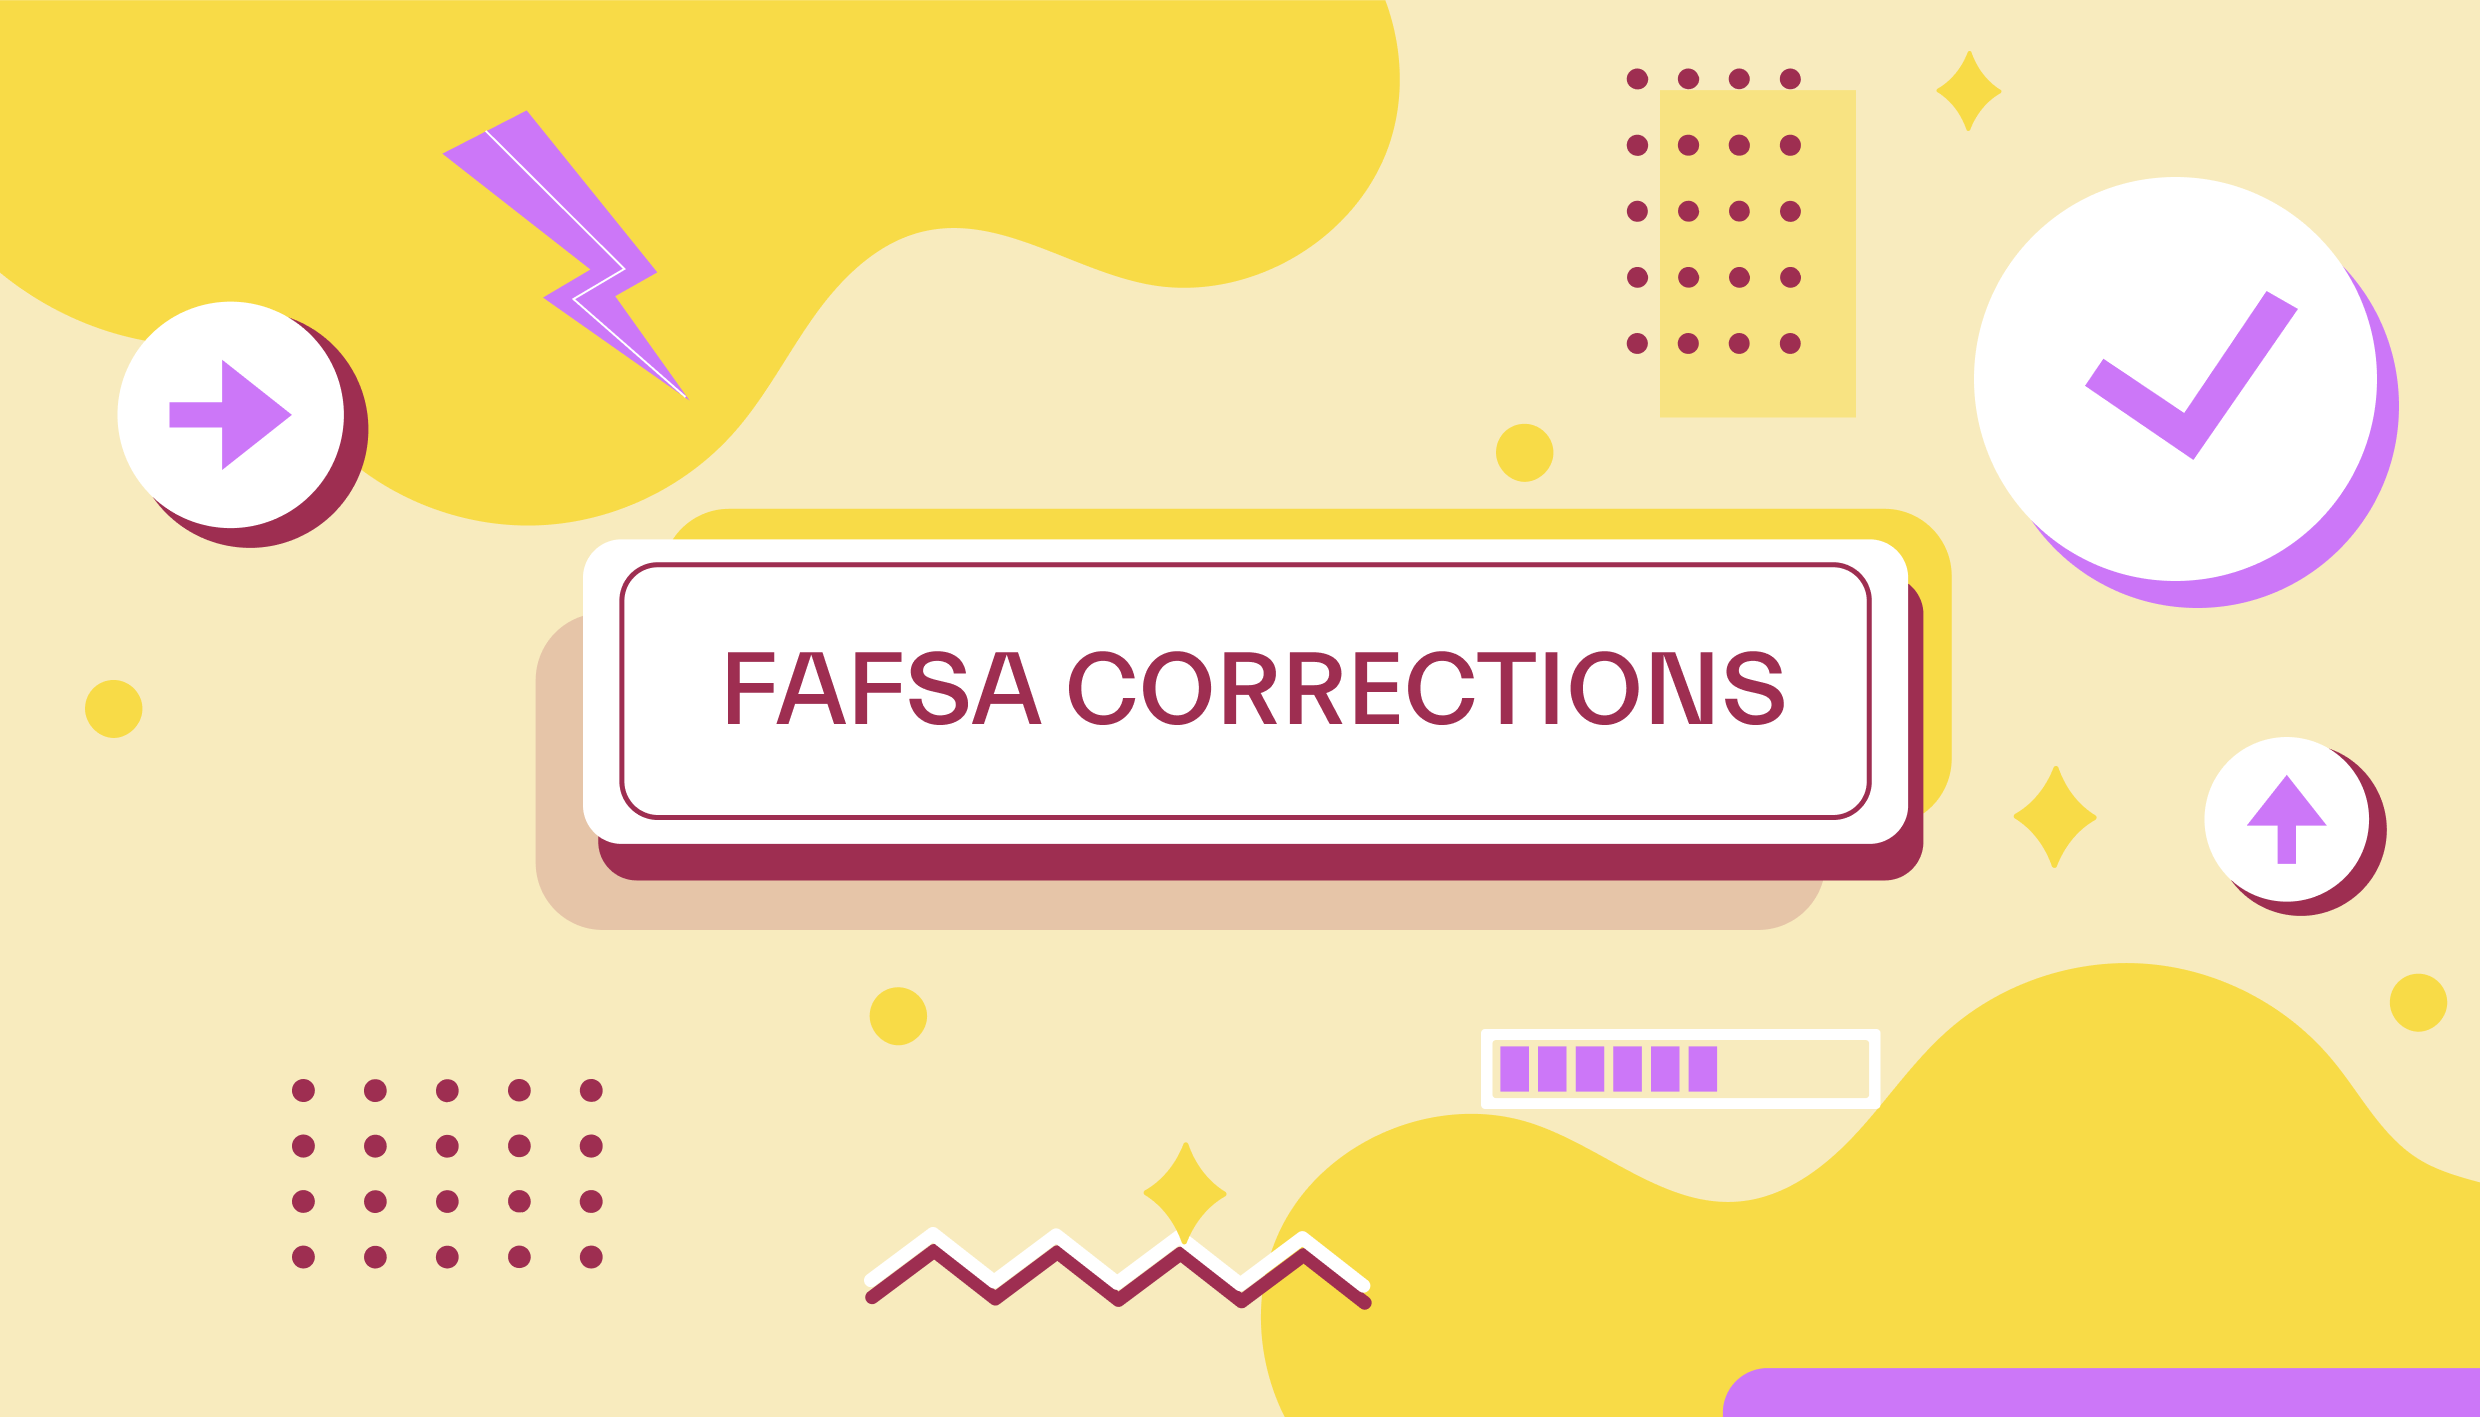 FAFSA corrections cover image